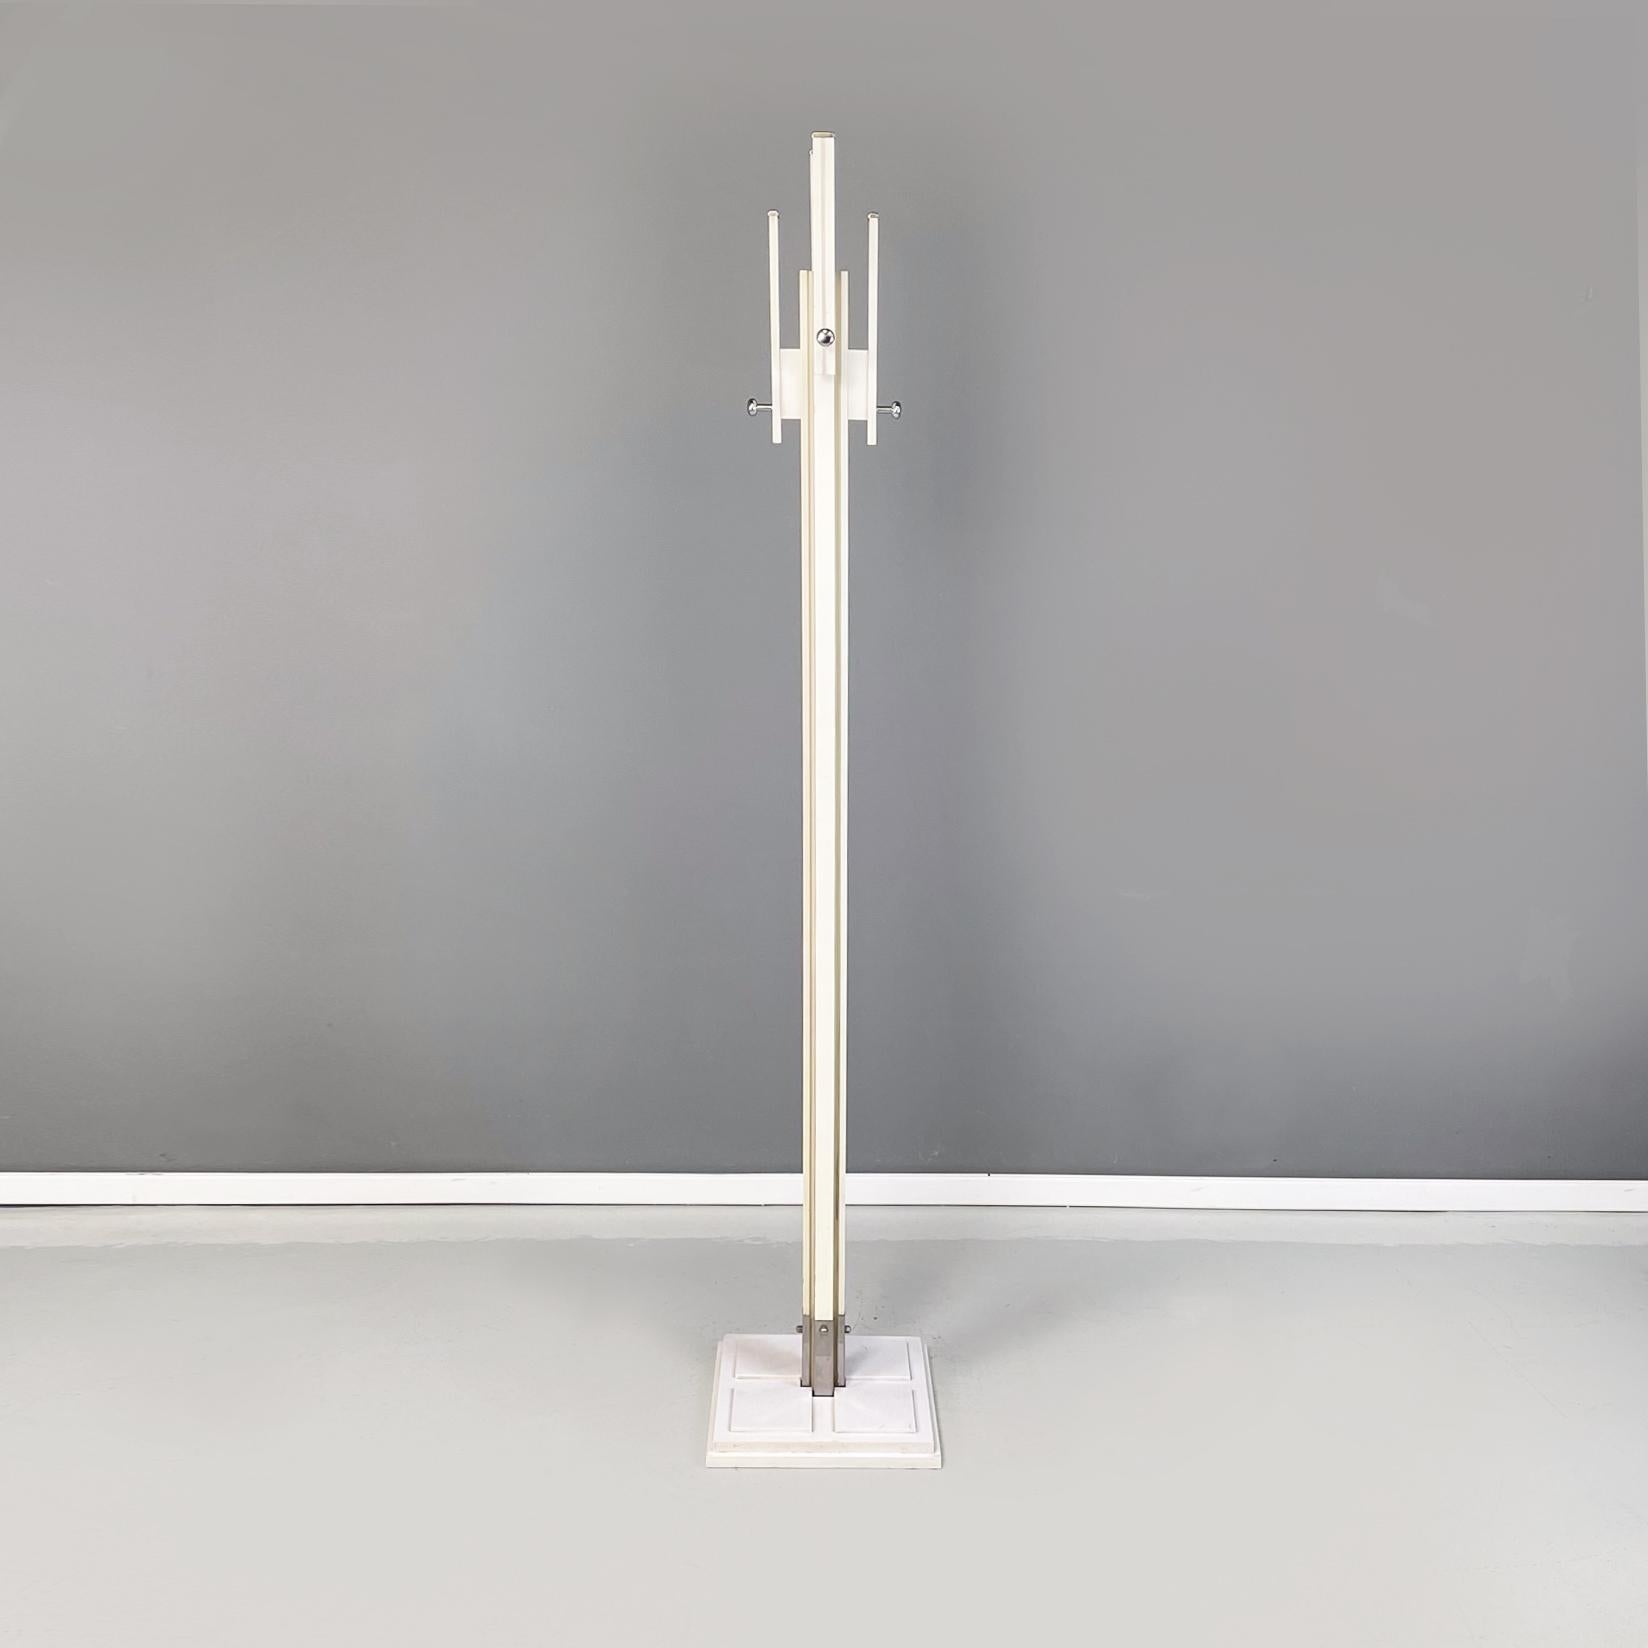 Italian mid-century white wood metal Coat stand by Carlo de Carli for Fiarm, 1960s
Coat stand with square base in white painted wood and metal. In the upper part it has 4 metal hooks with different heights. The central structure is made up of a